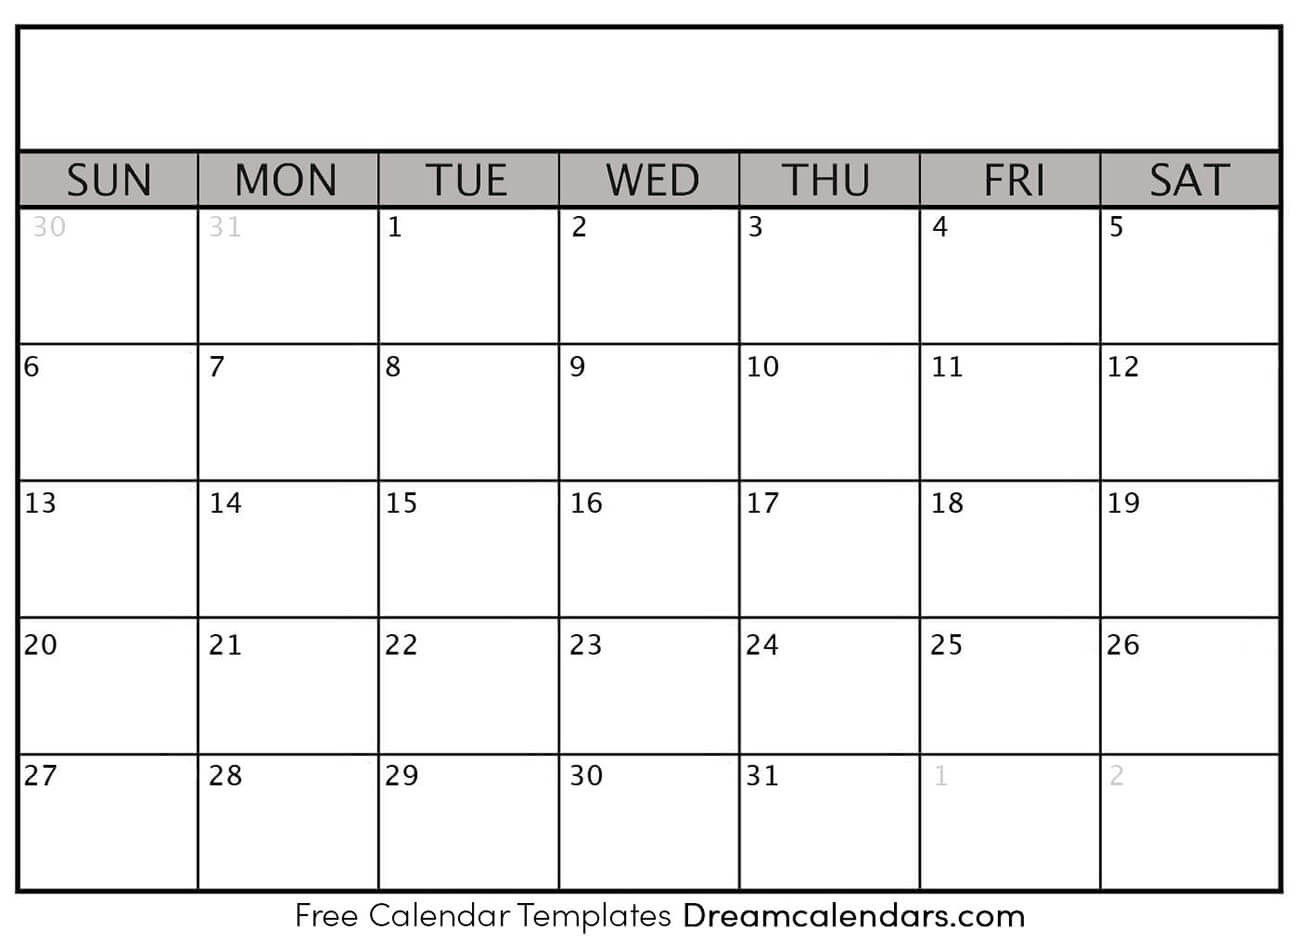 Calendar Template to Print the Old Reader